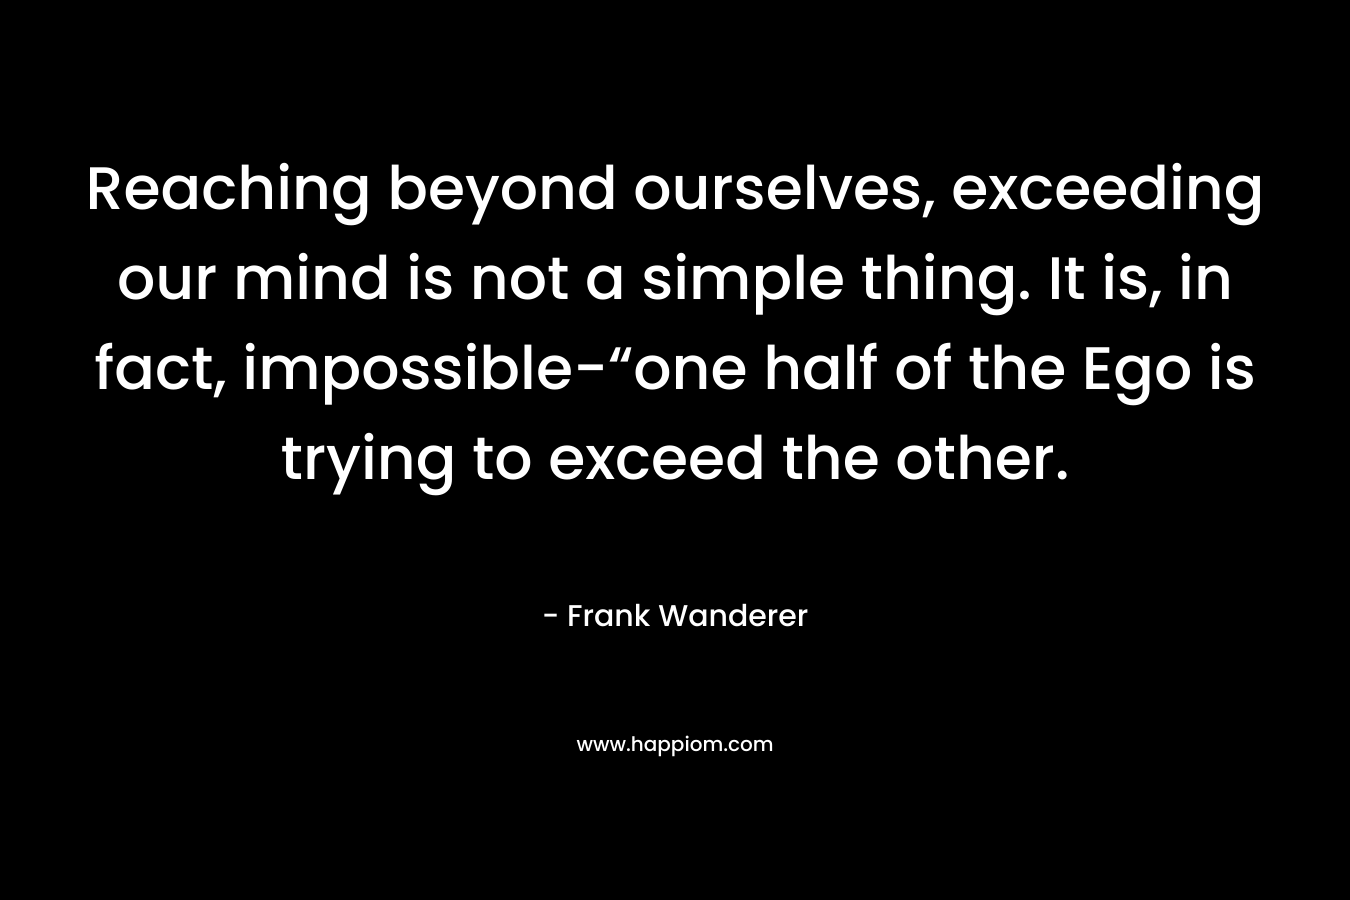 Reaching beyond ourselves, exceeding our mind is not a simple thing. It is, in fact, impossible-“one half of the Ego is trying to exceed the other. – Frank Wanderer